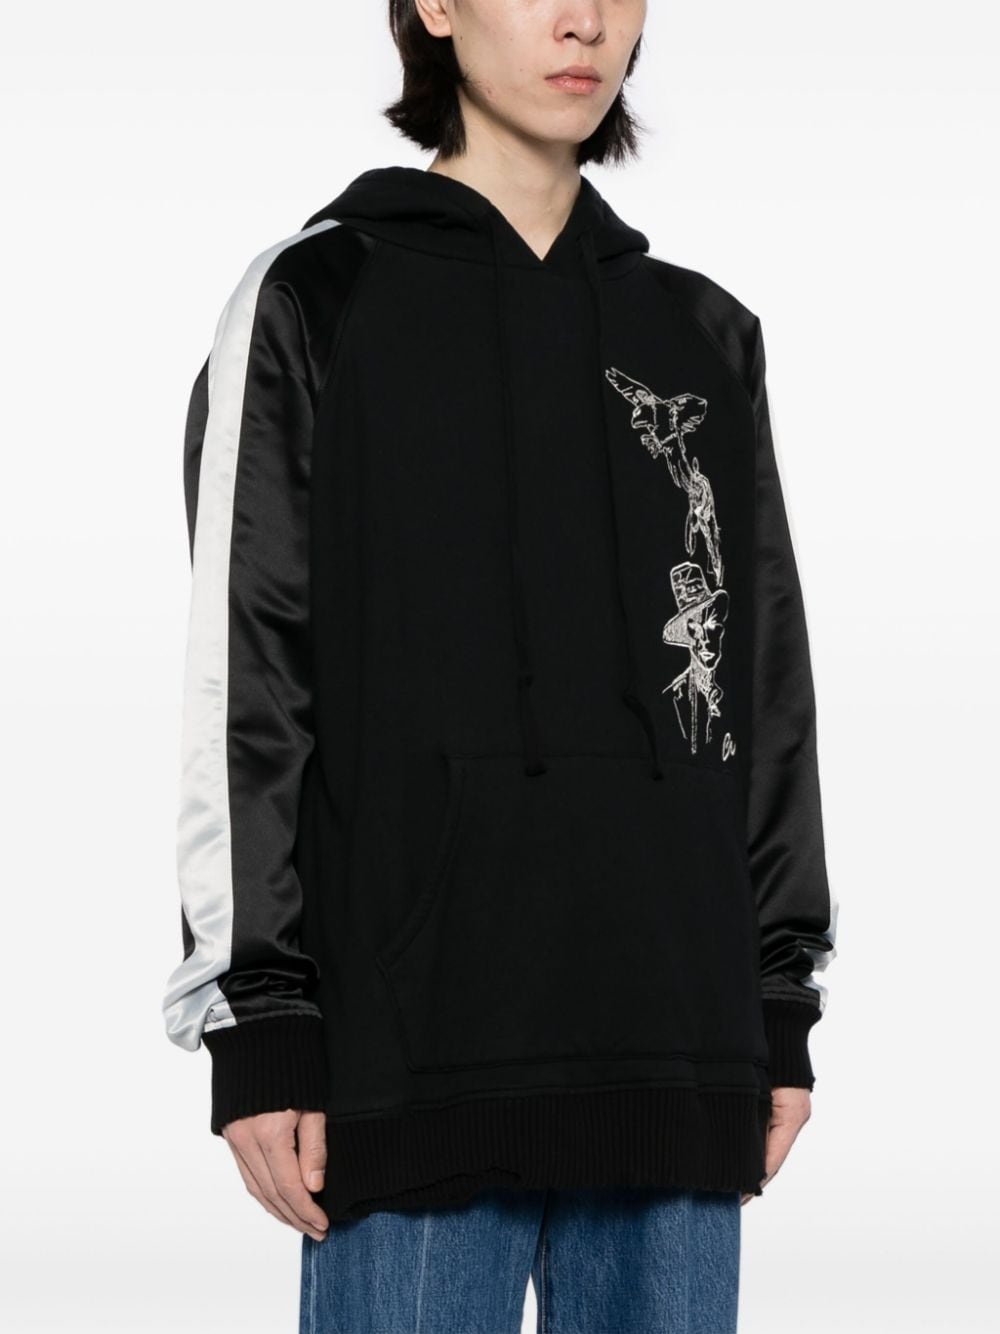 Souvenir embroidered hoodie - 3